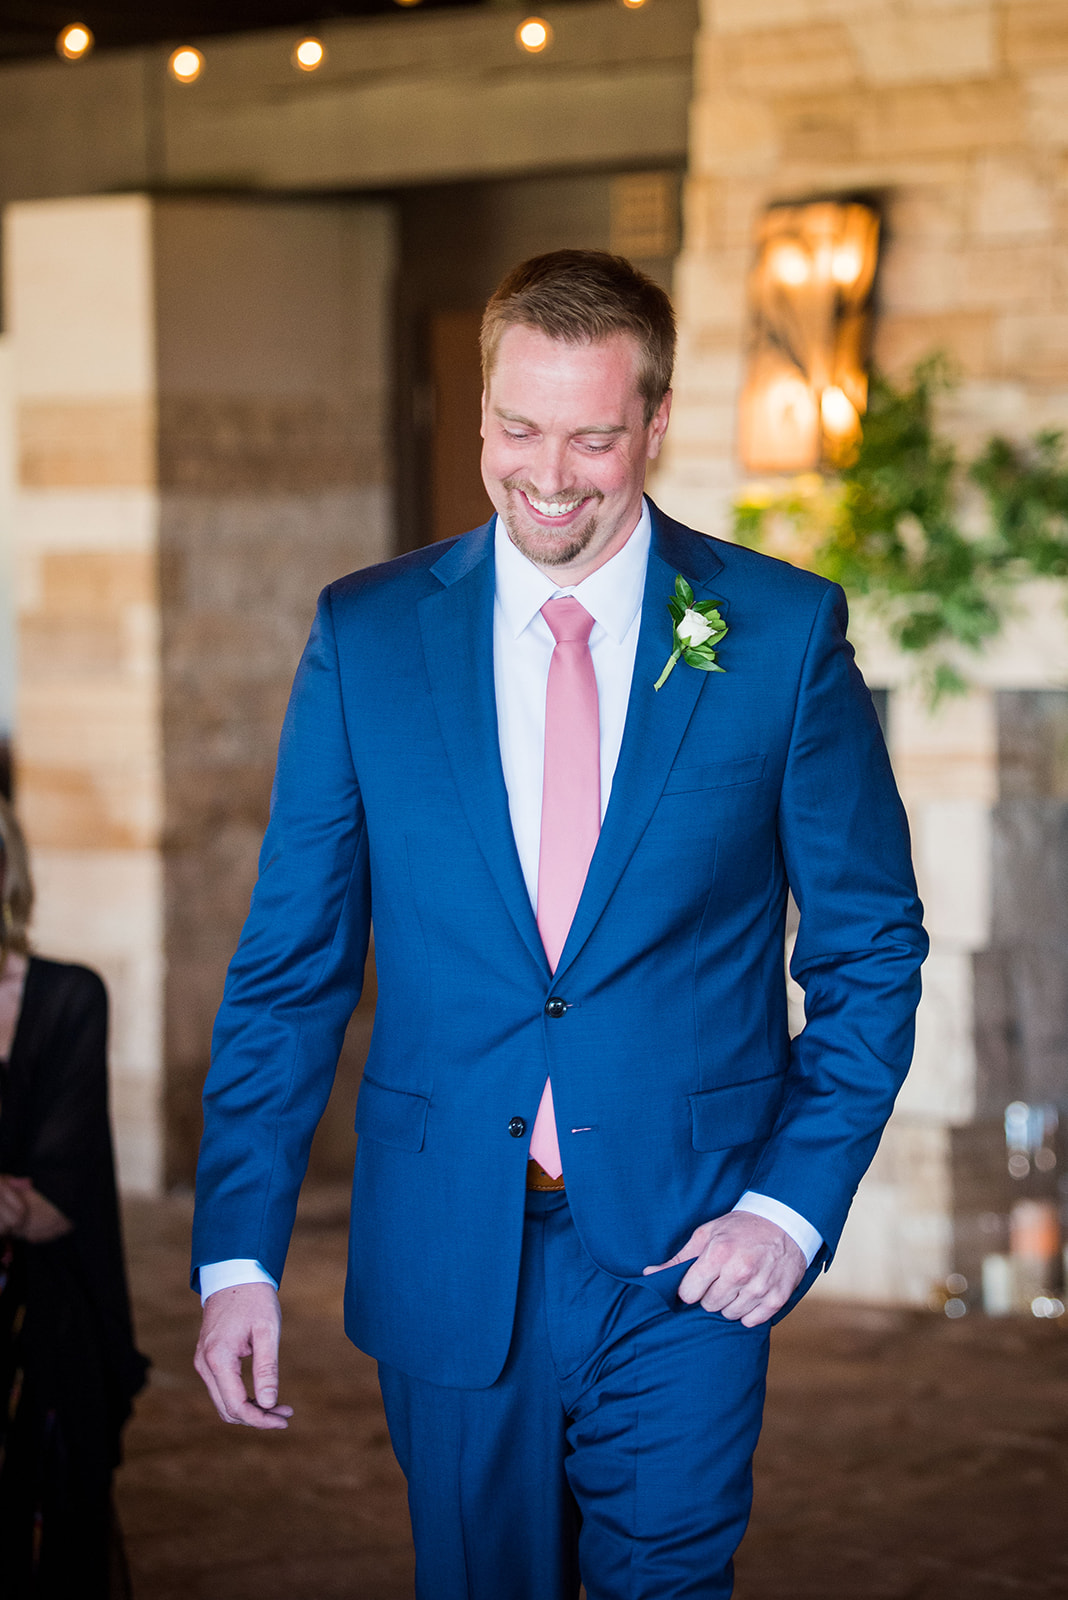 The groom smiles down at the ground as he walks up the aisle during the wedding ceremony.